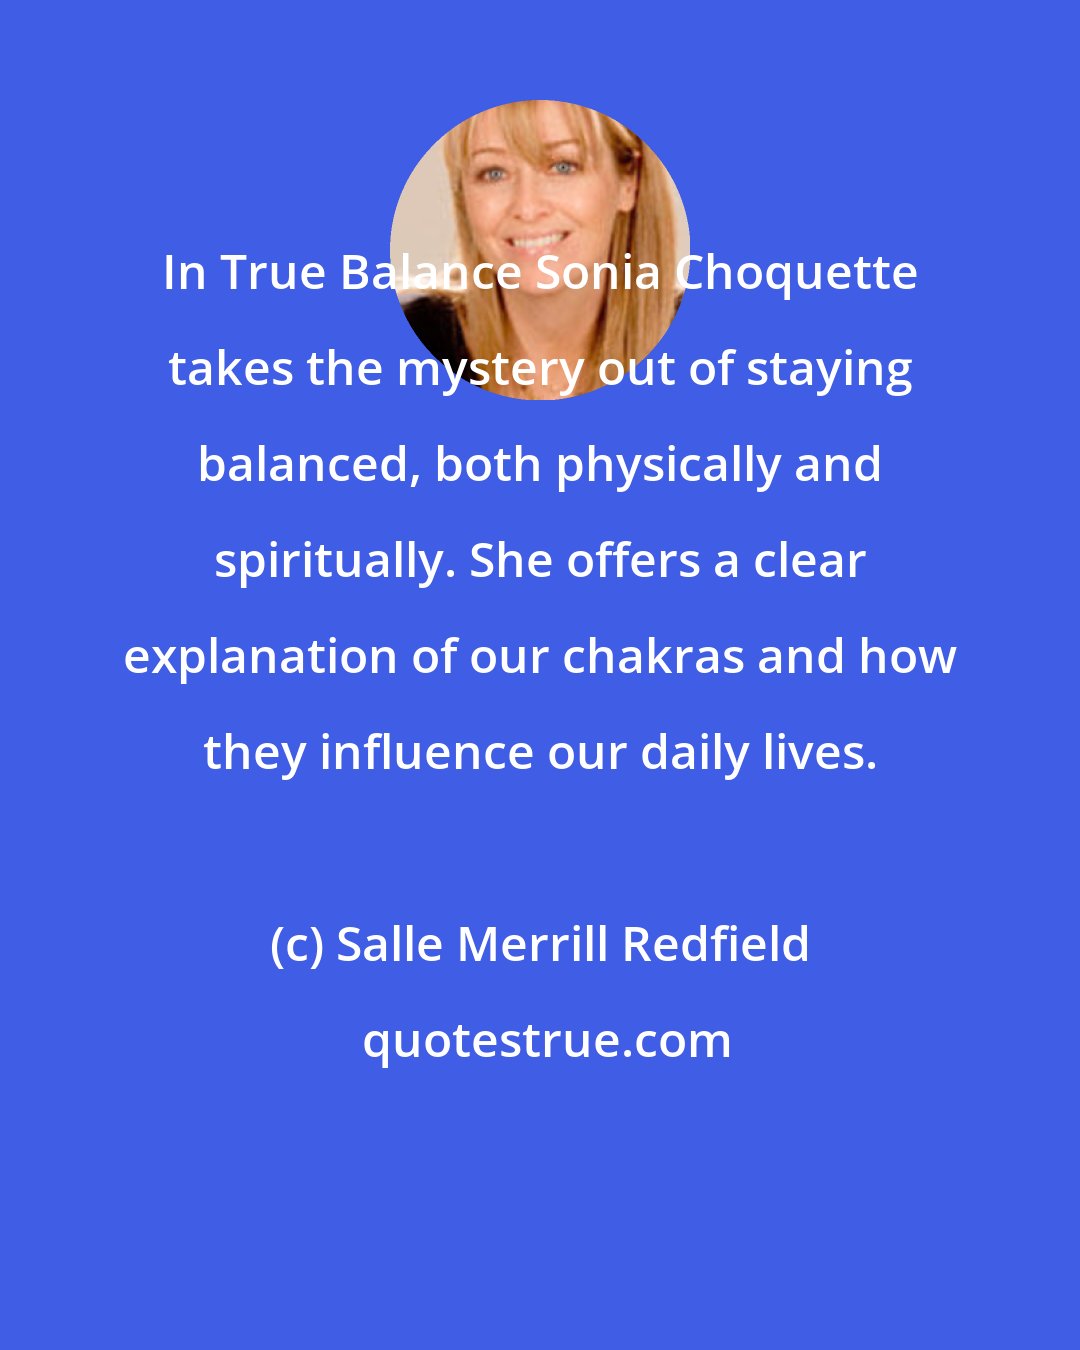 Salle Merrill Redfield: In True Balance Sonia Choquette takes the mystery out of staying balanced, both physically and spiritually. She offers a clear explanation of our chakras and how they influence our daily lives.